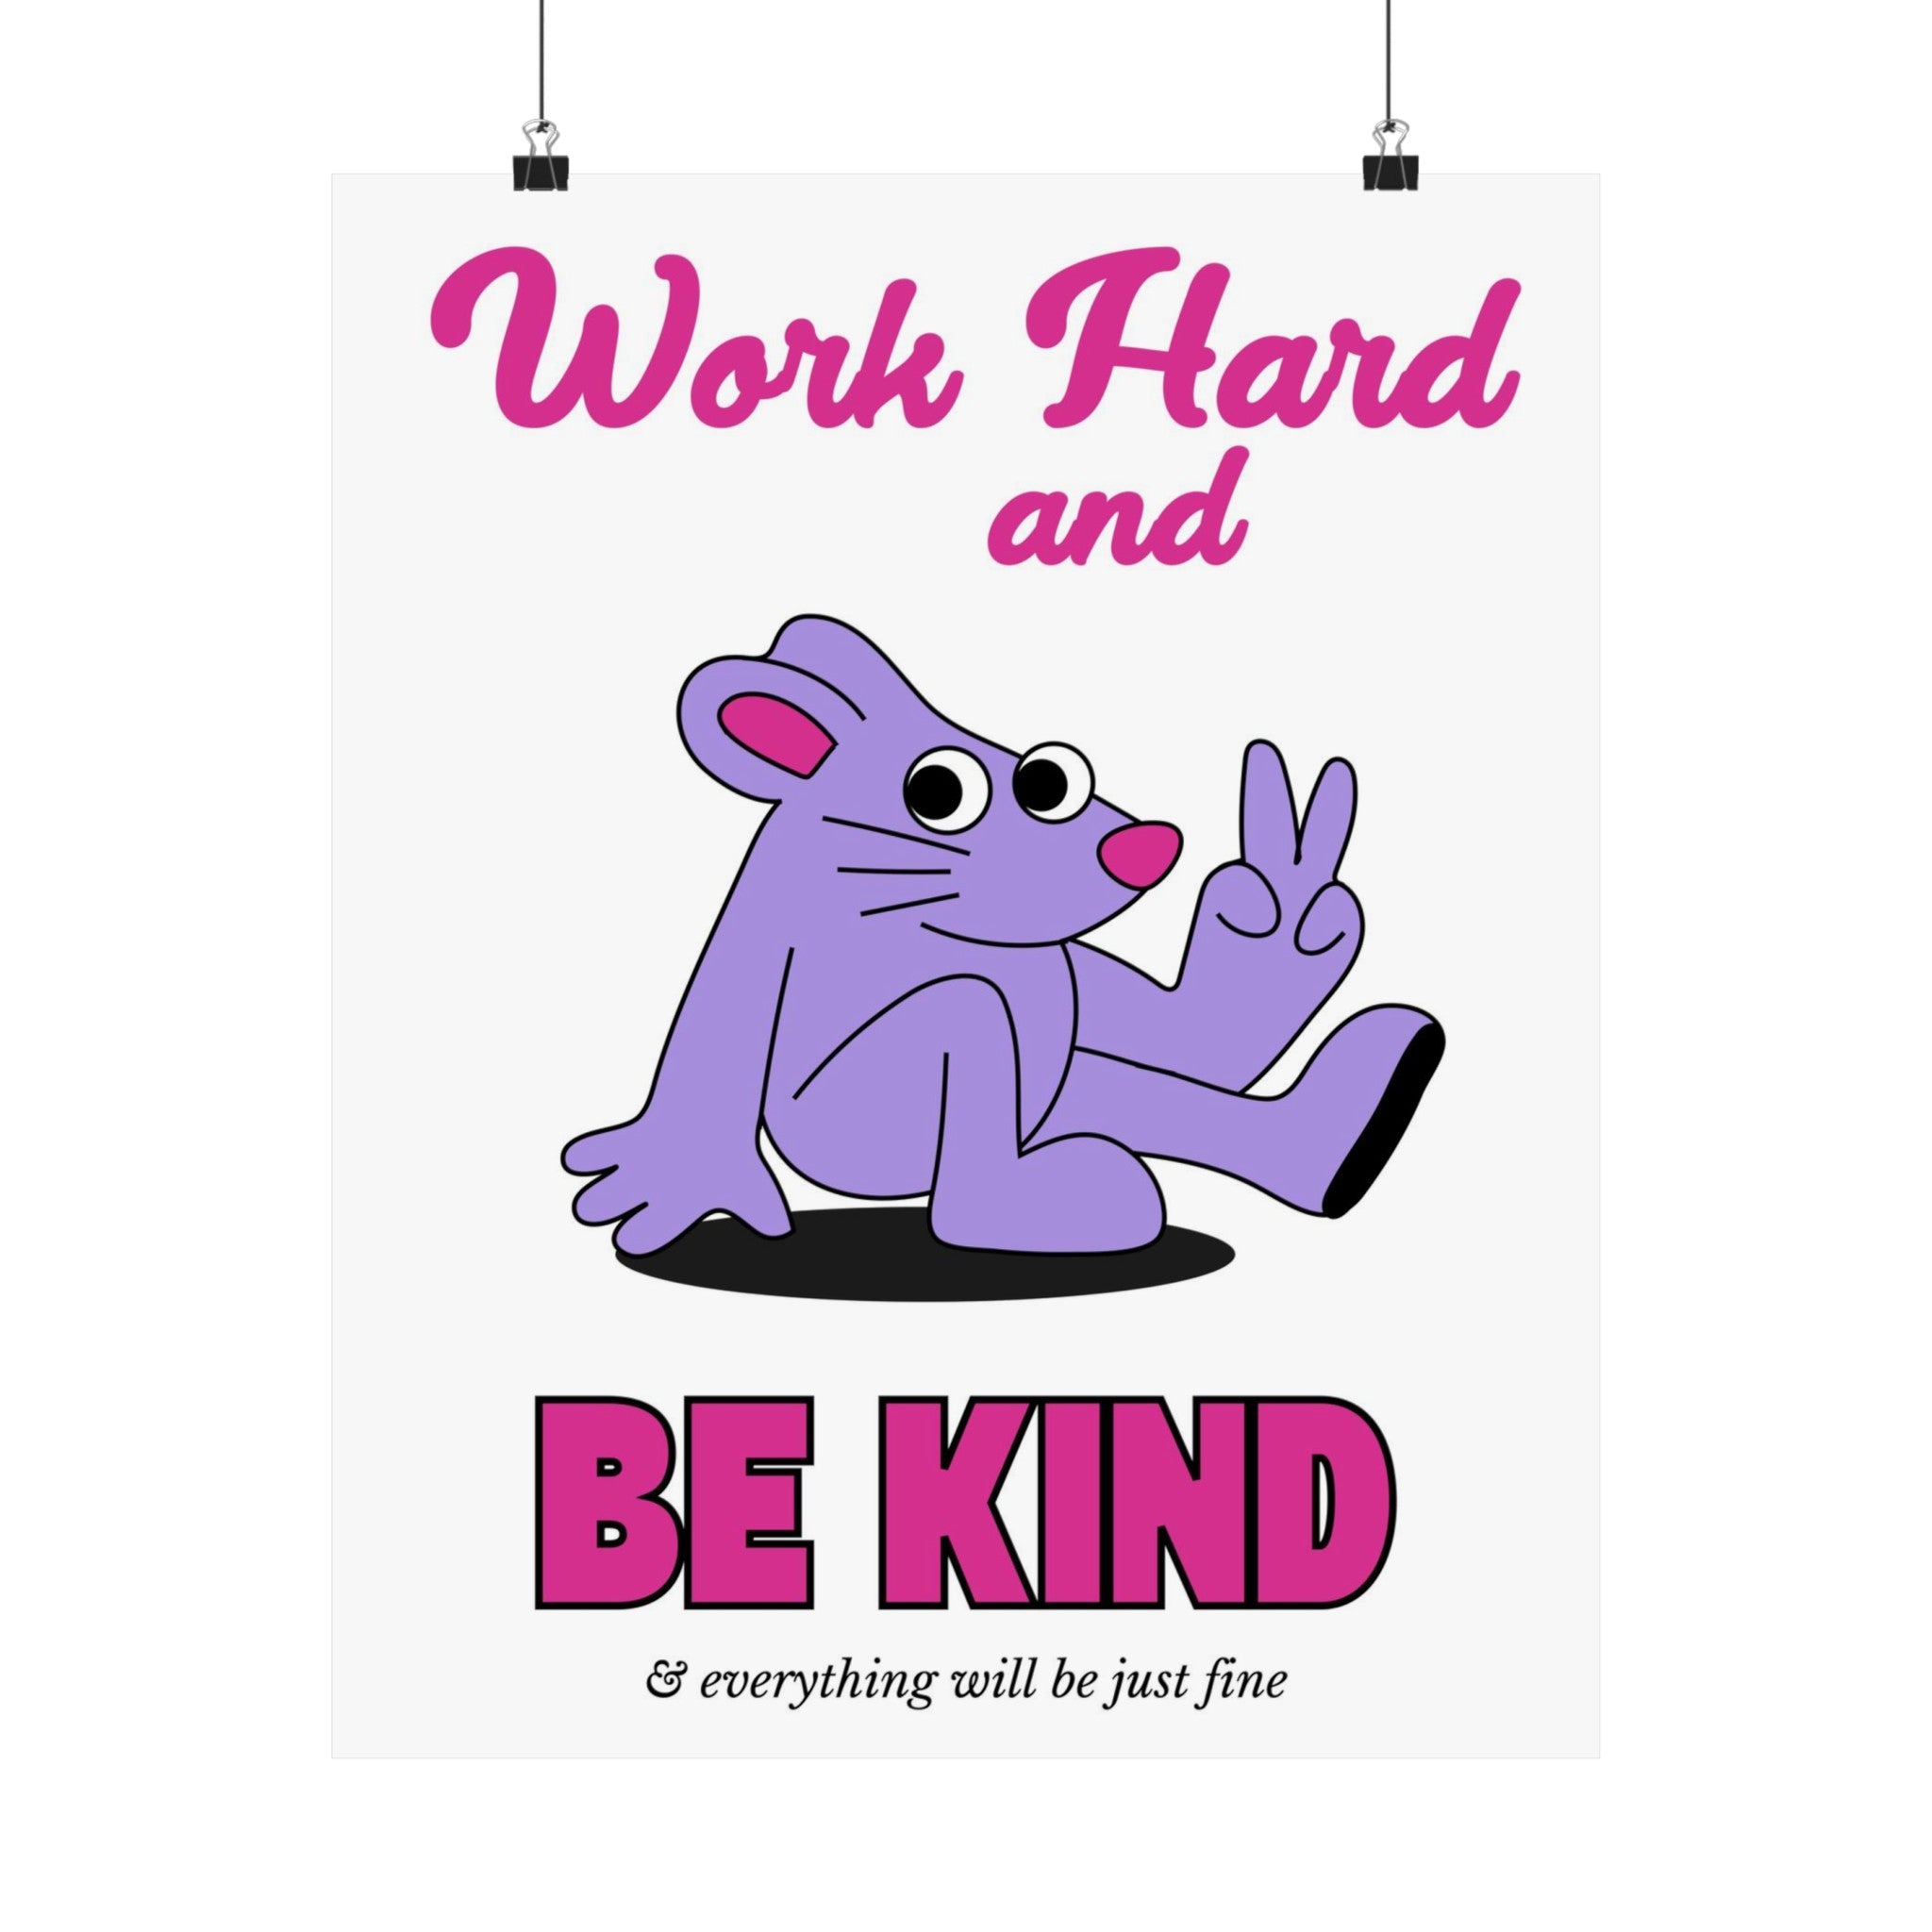 Work Hard and Be Kind Physical Poster